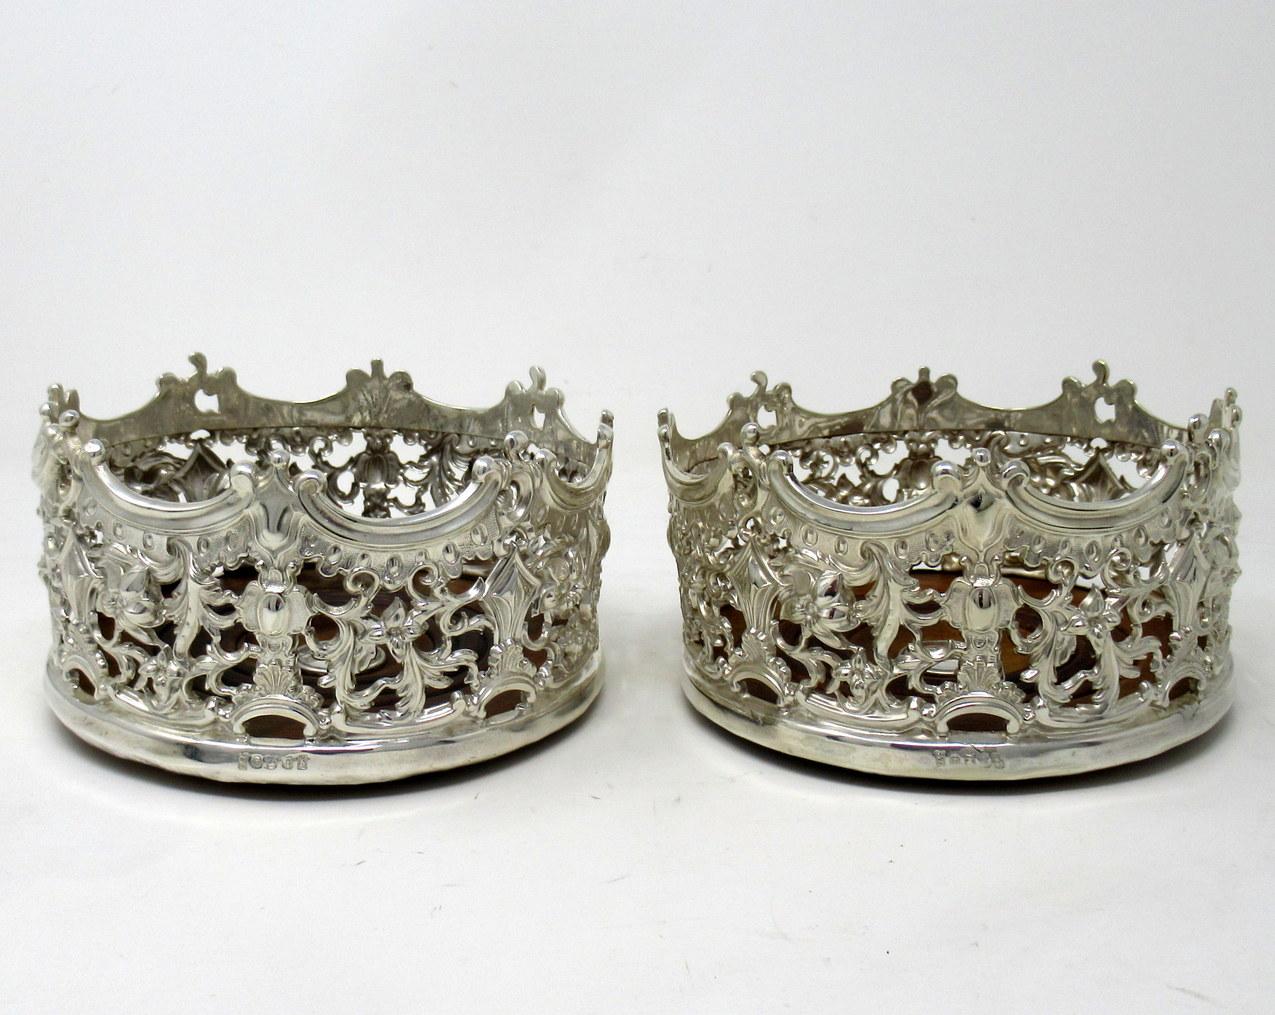 Stylish Pair of Italian Silver Plated Rococo Style Wine Champagne Coasters 5